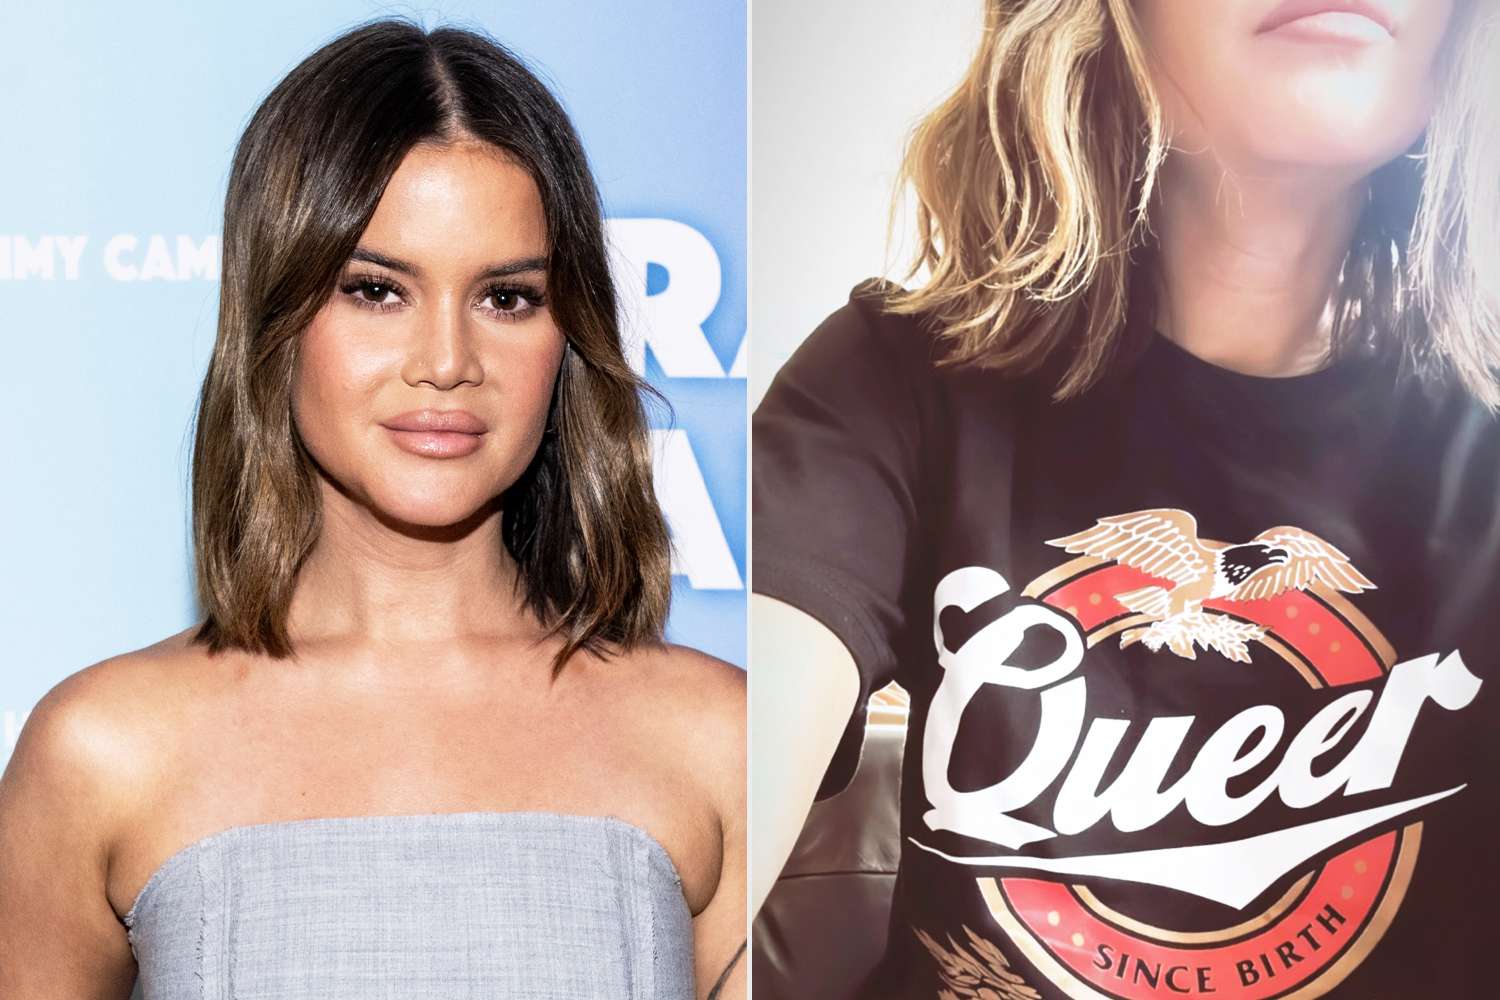 Maren Morris Wears 'Queer Since Birth' T-Shirt in Instagram Selfie After Coming Out as Bisexual